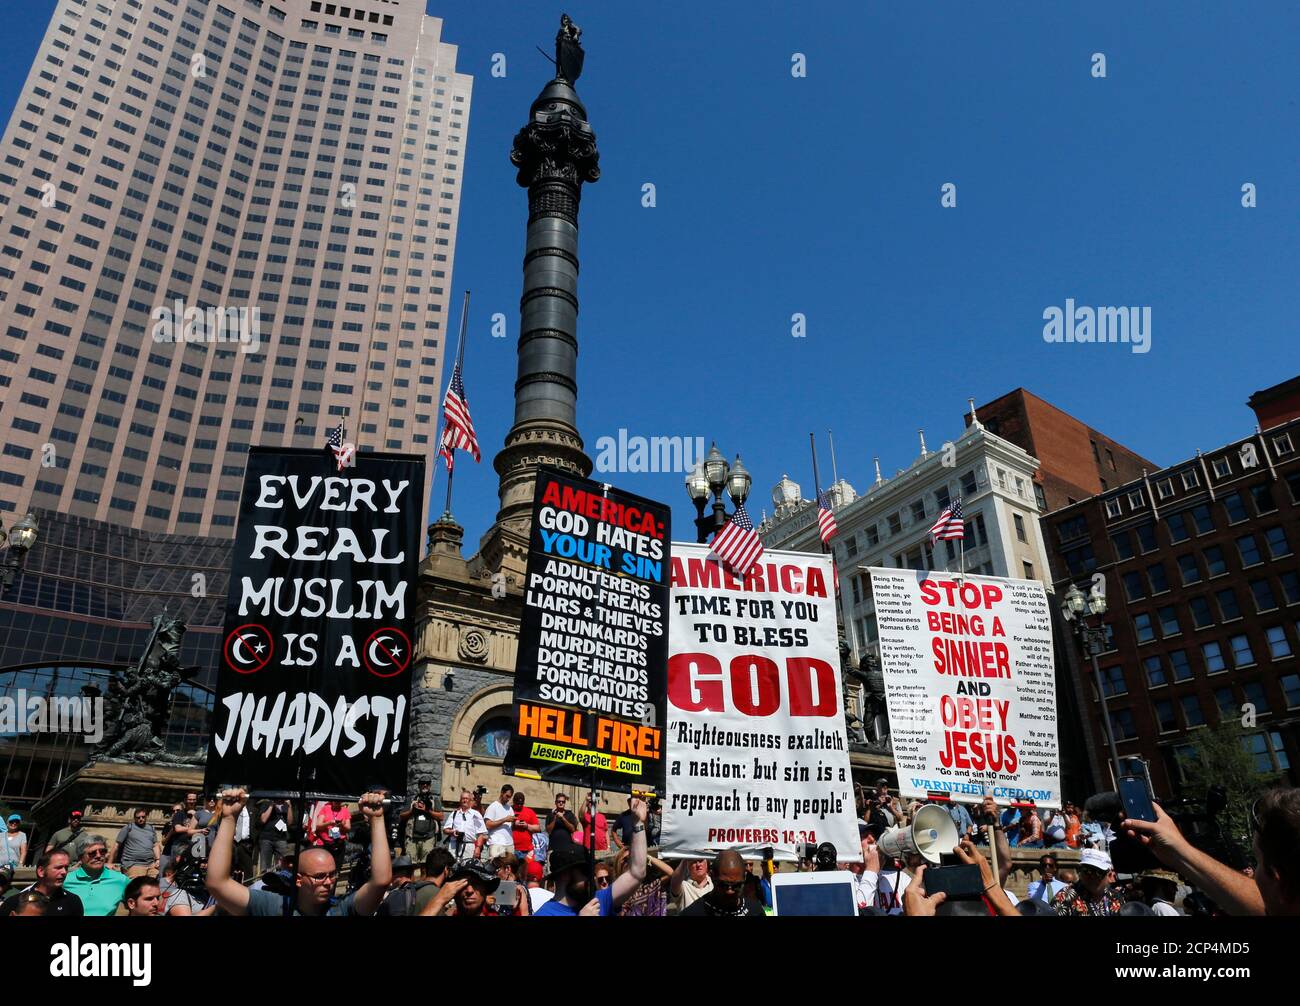 Religious demonstrators protest in a public square near the Republican National Convention in Cleveland, Ohio, U.S. July 19, 2016.   REUTERS/Lucas Jackson Stock Photo